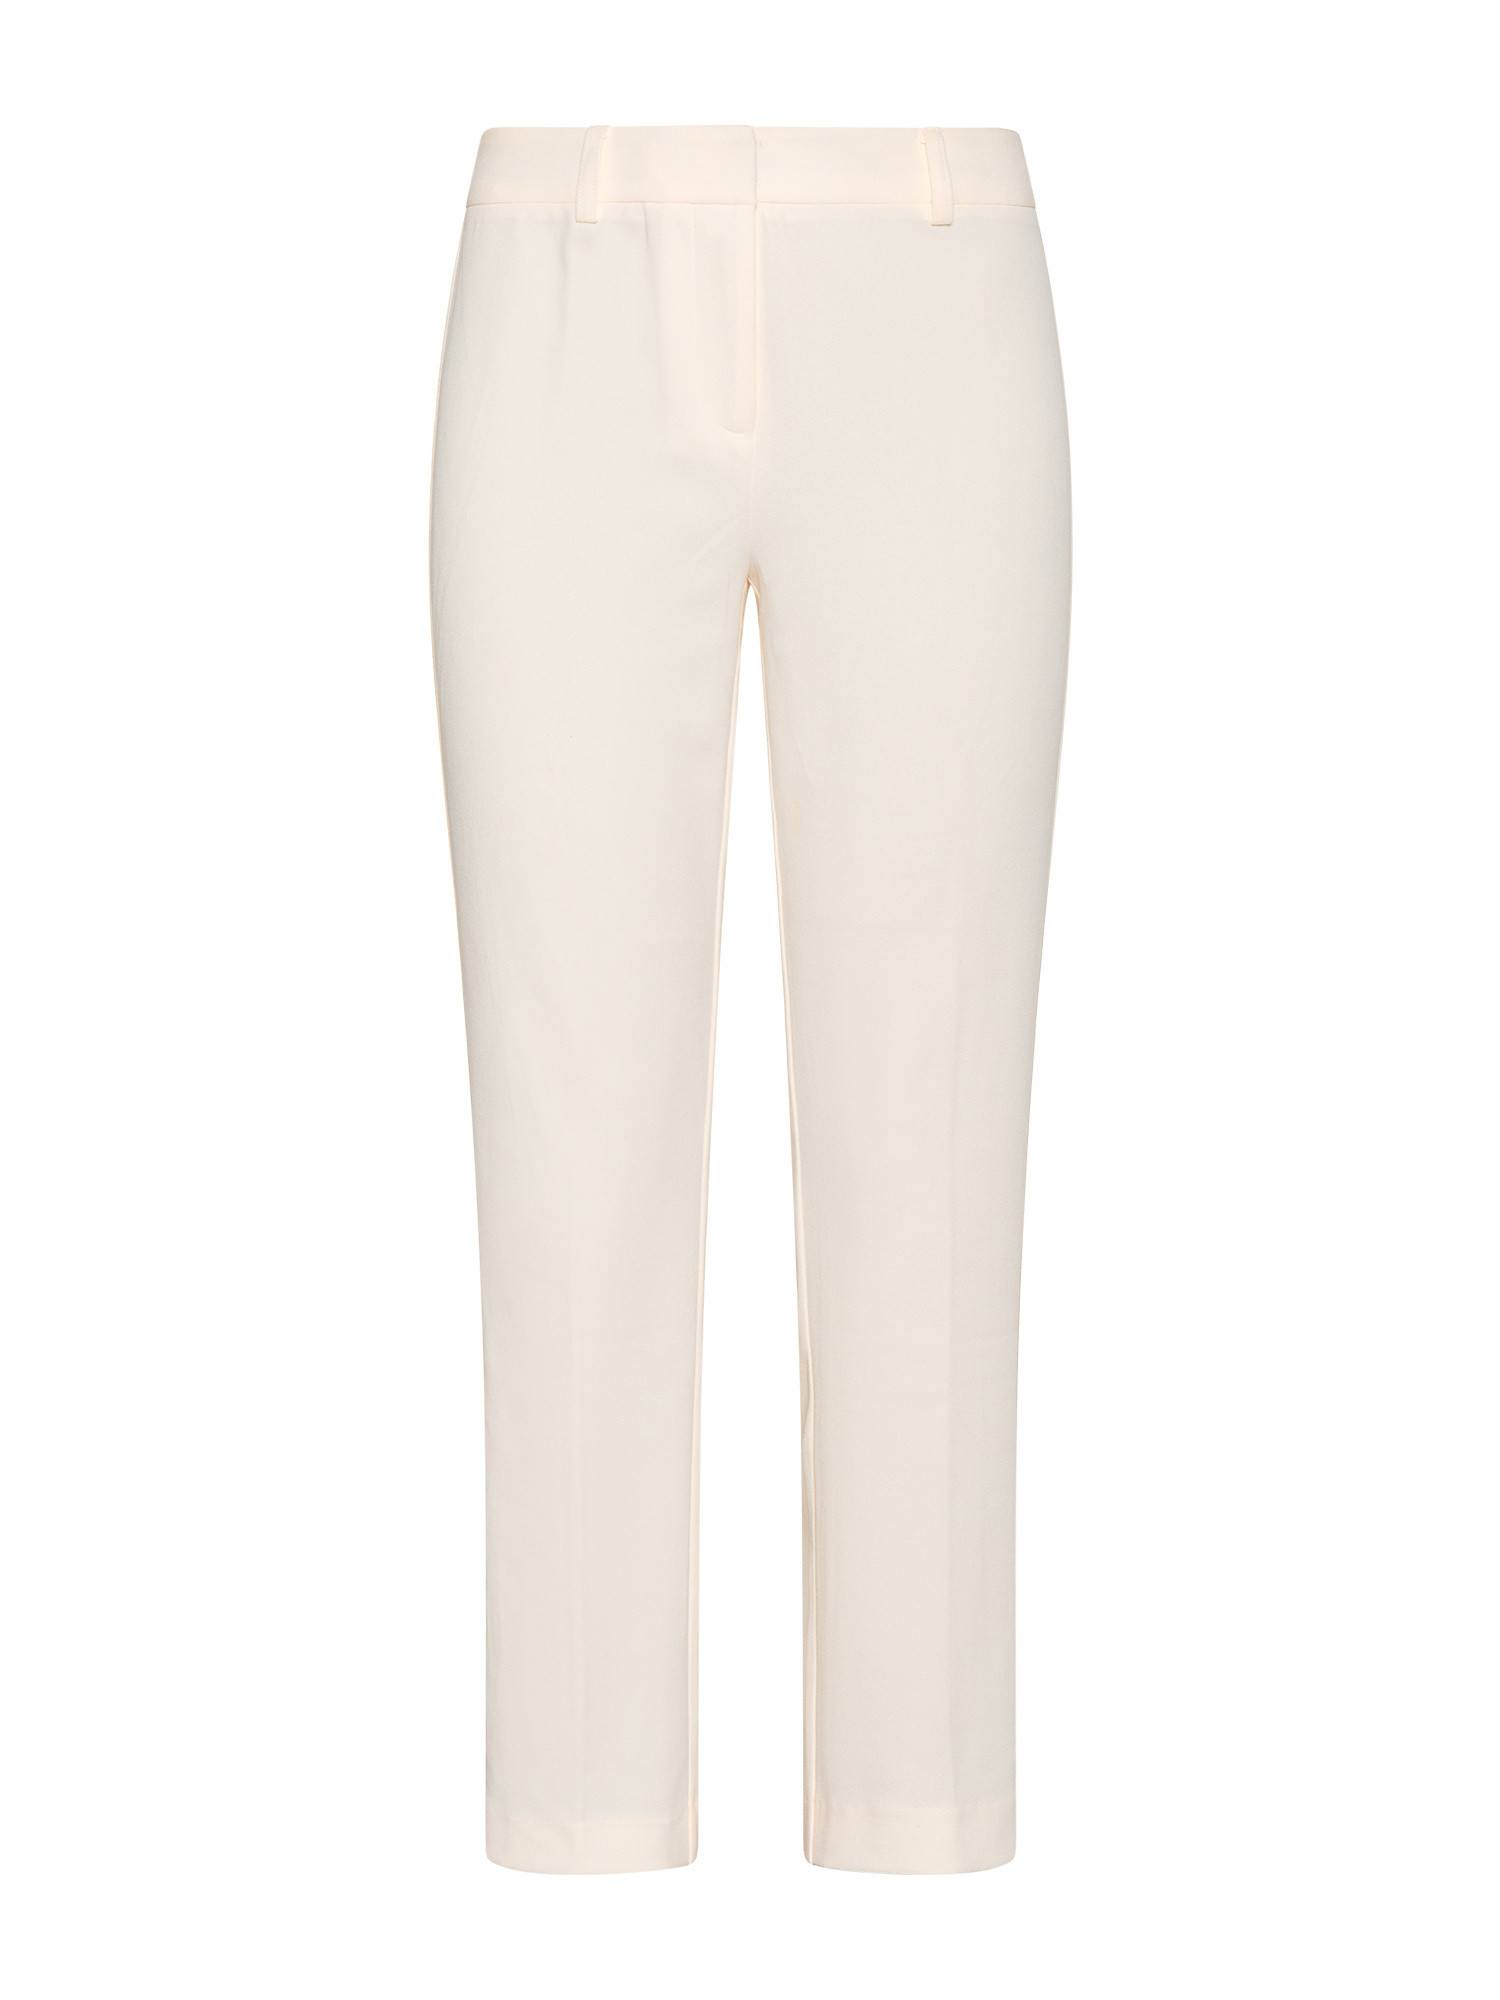 Koan - Crepe flare trousers, White Cream, large image number 0